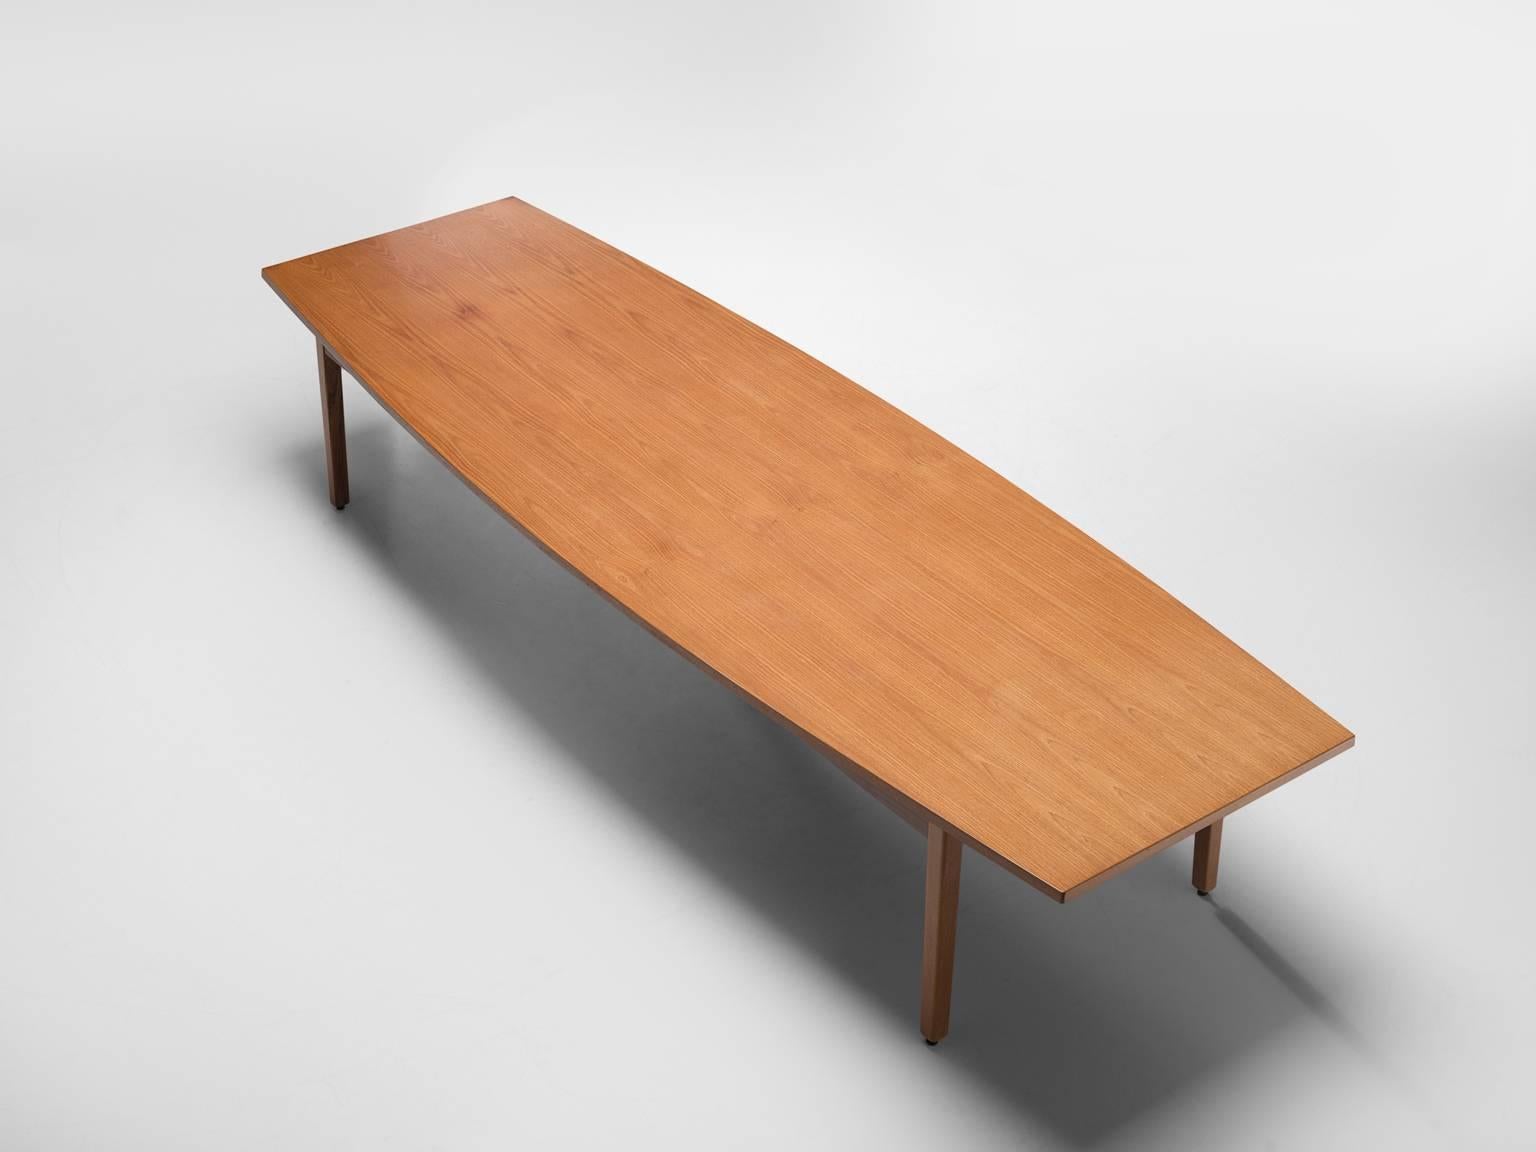 Large conference table in teak, Denmark, 1960s.

This well sized table has a boat shaped top and it made out of one-piece, it features elegantly curved sides and four slightly tapered legs. The clear shape of the top and the wonderful, modest